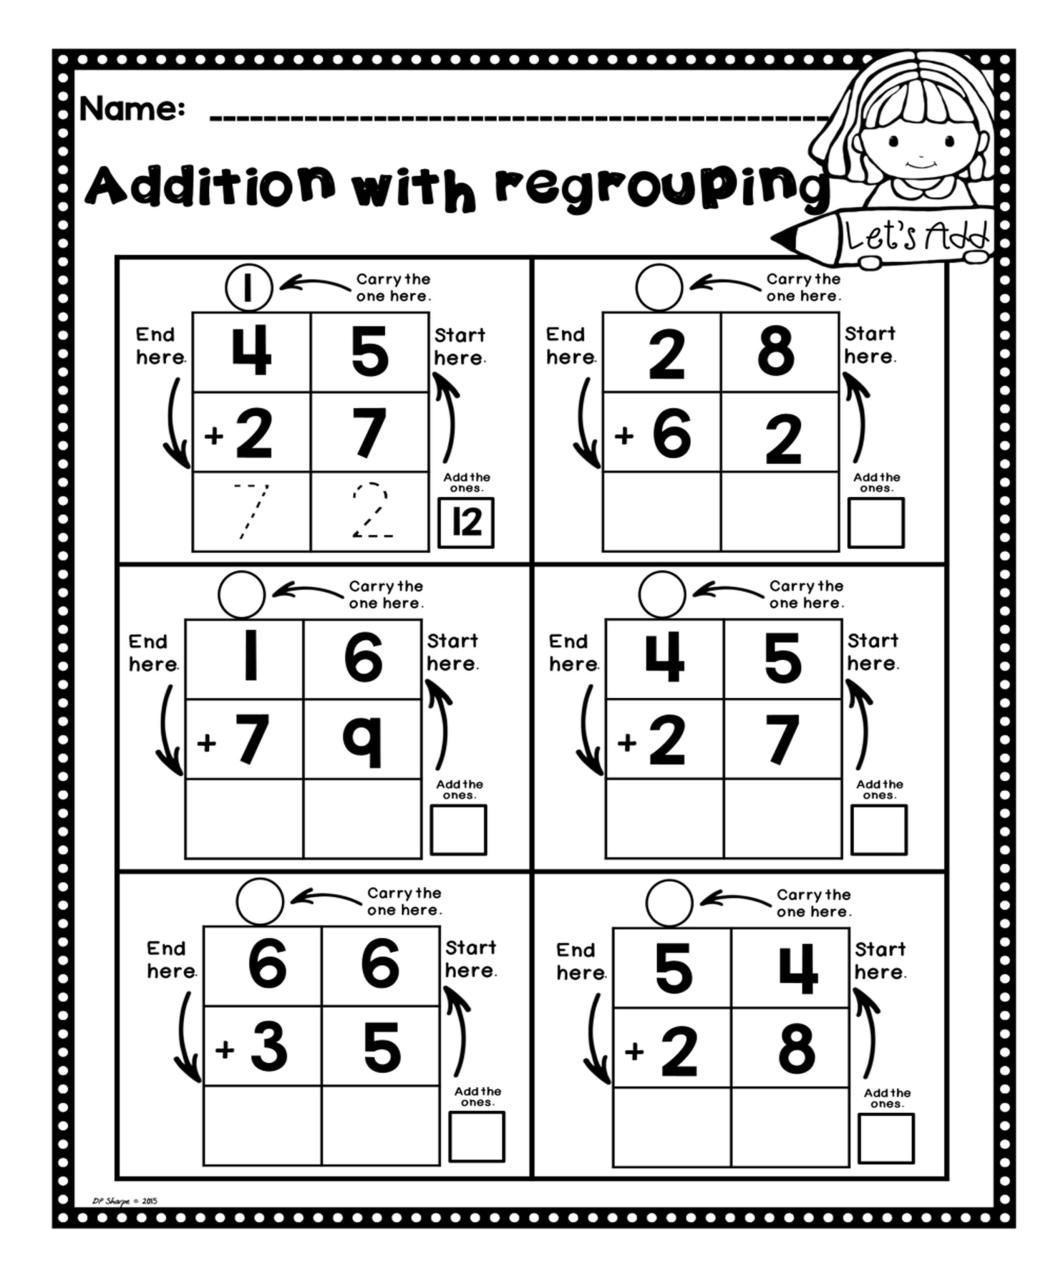 Addition with Regrouping Worksheets Fun Set Addition with regrouping